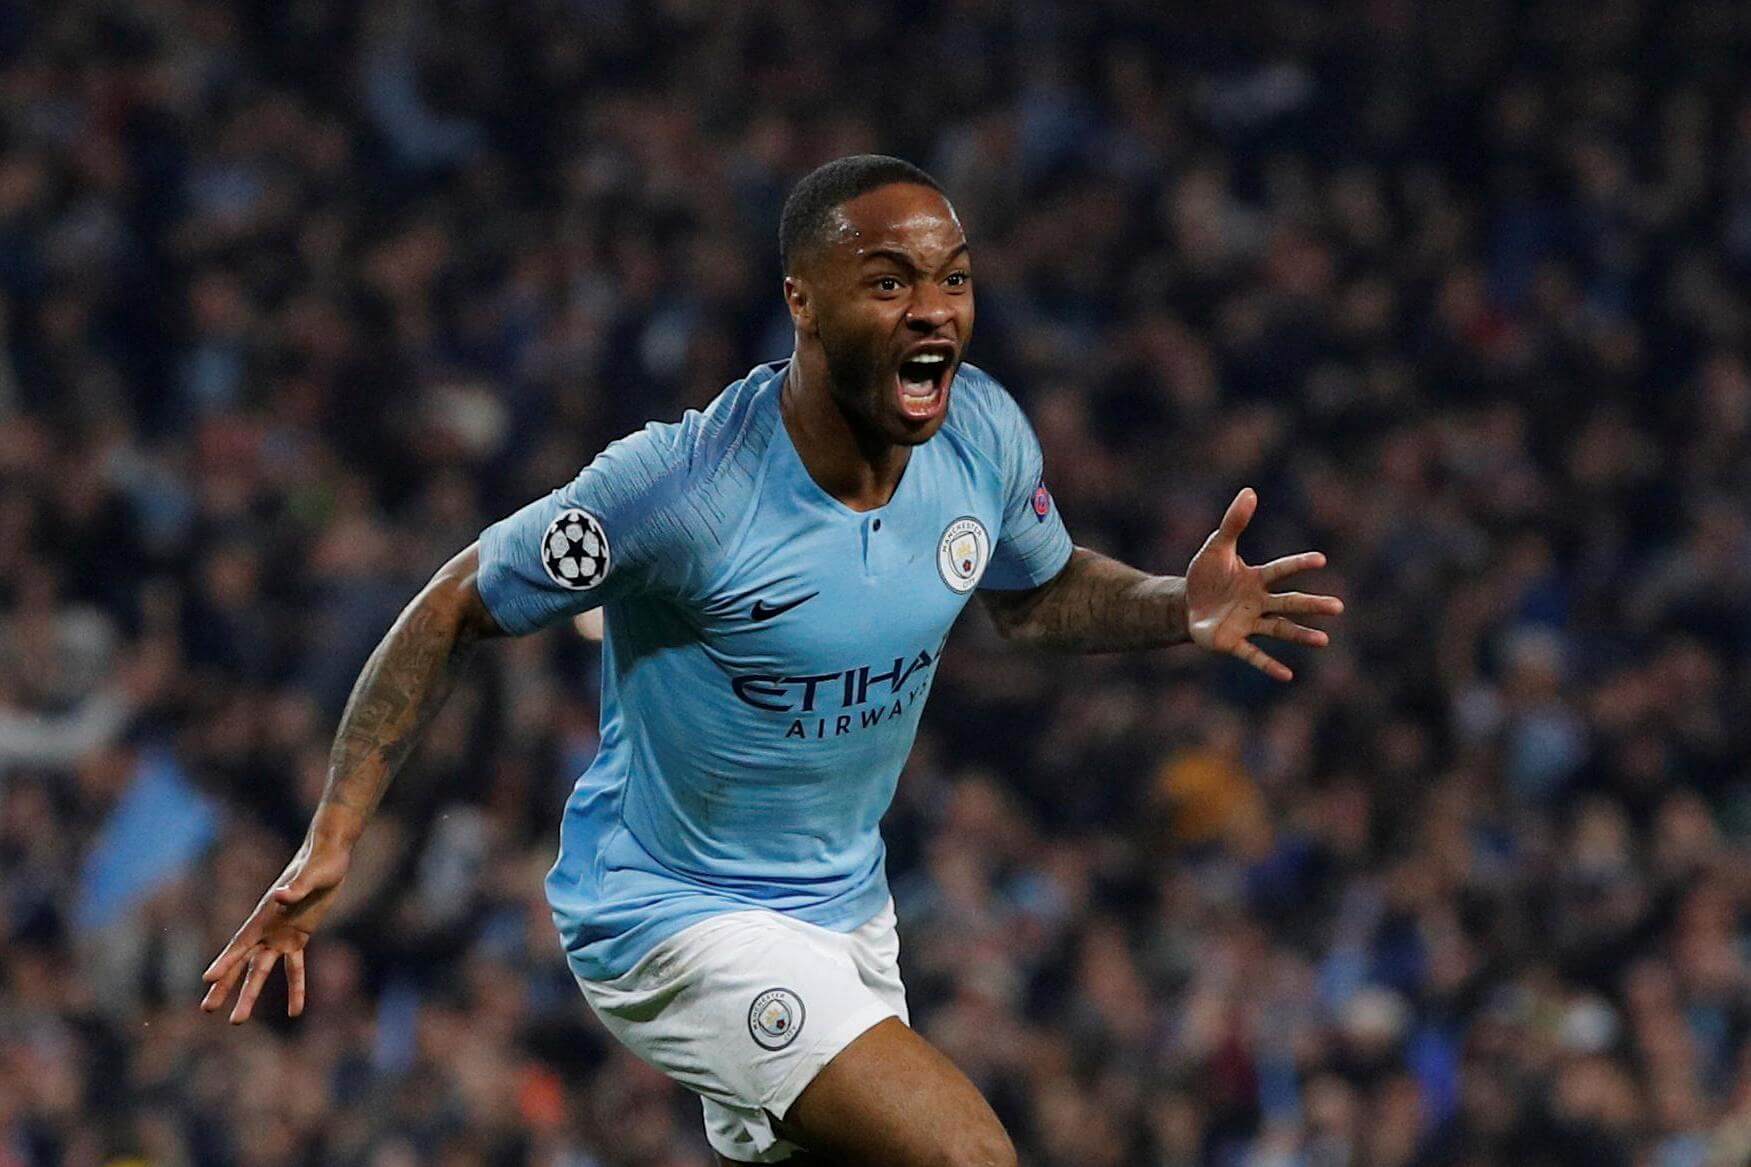 Raheem Sterling, Manchester City Star Could Follow 5 Year Trend